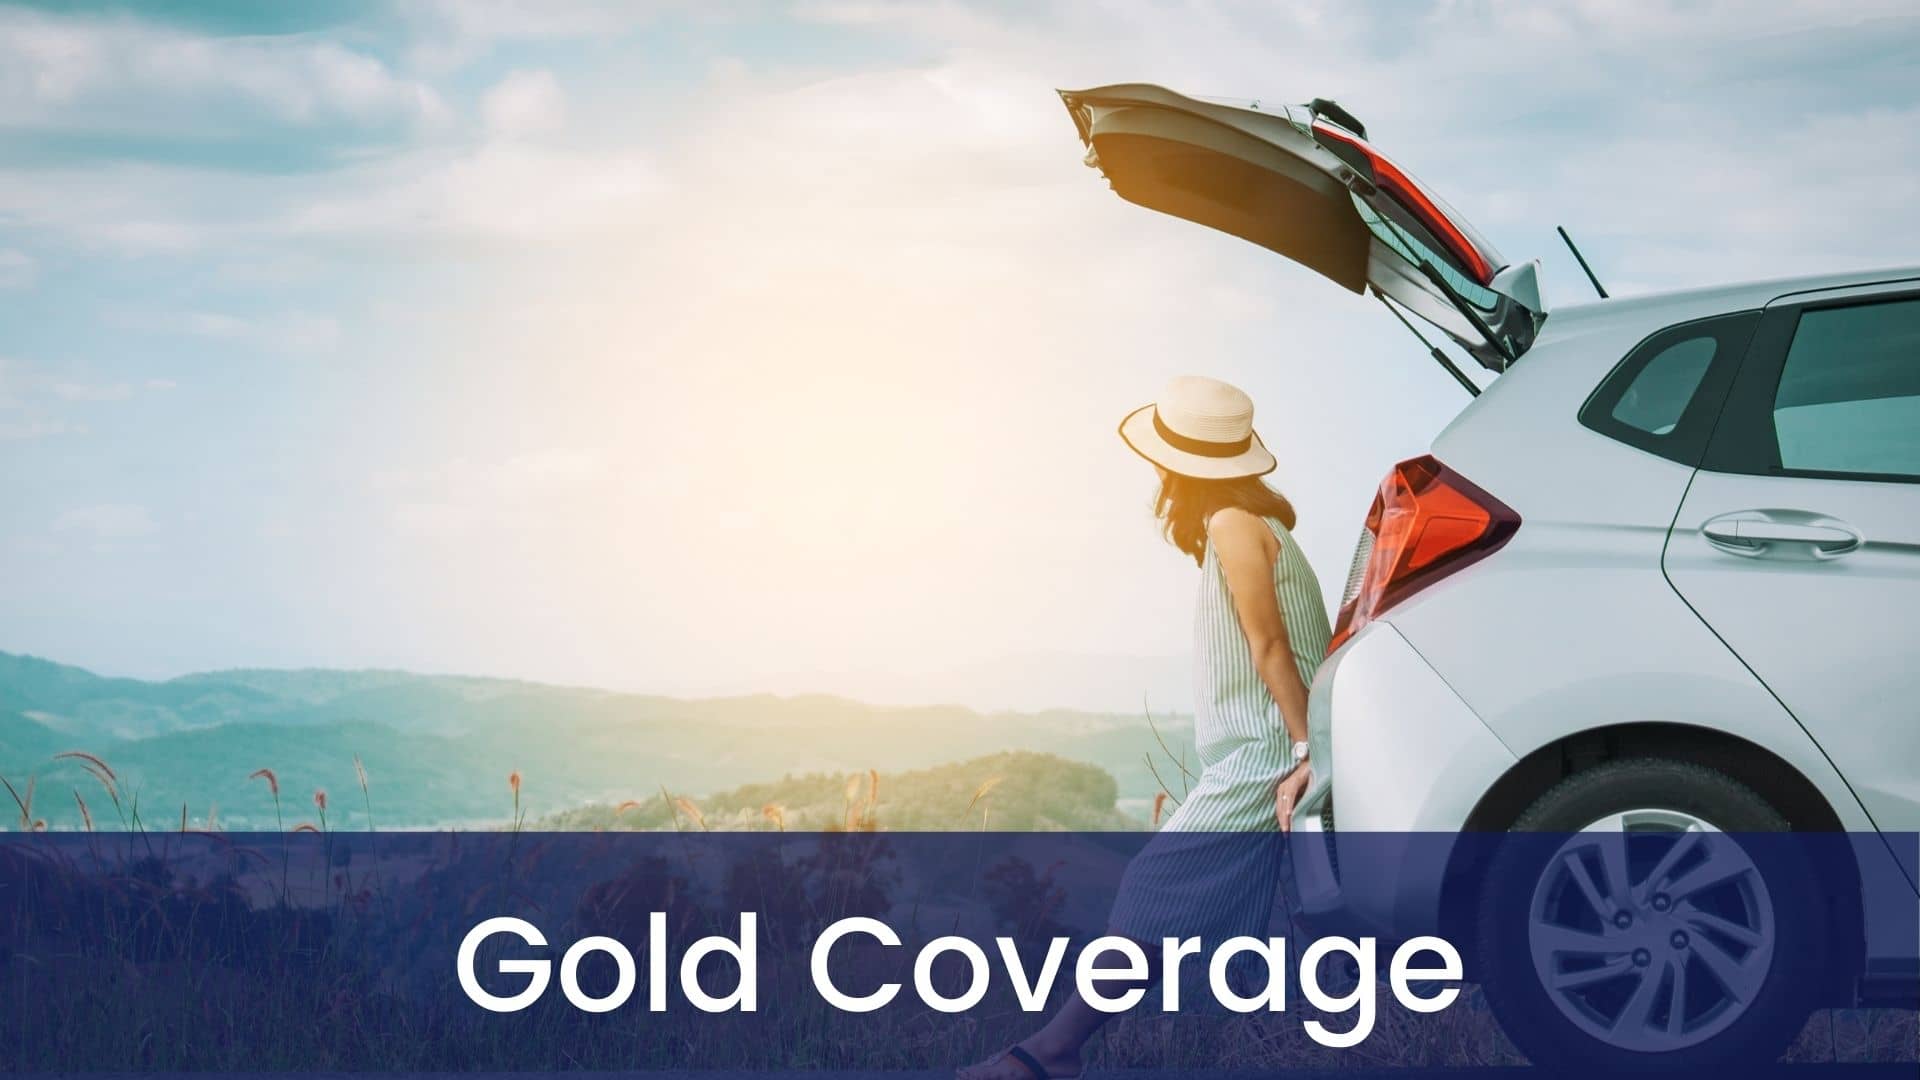 Gold extended Car Warranty